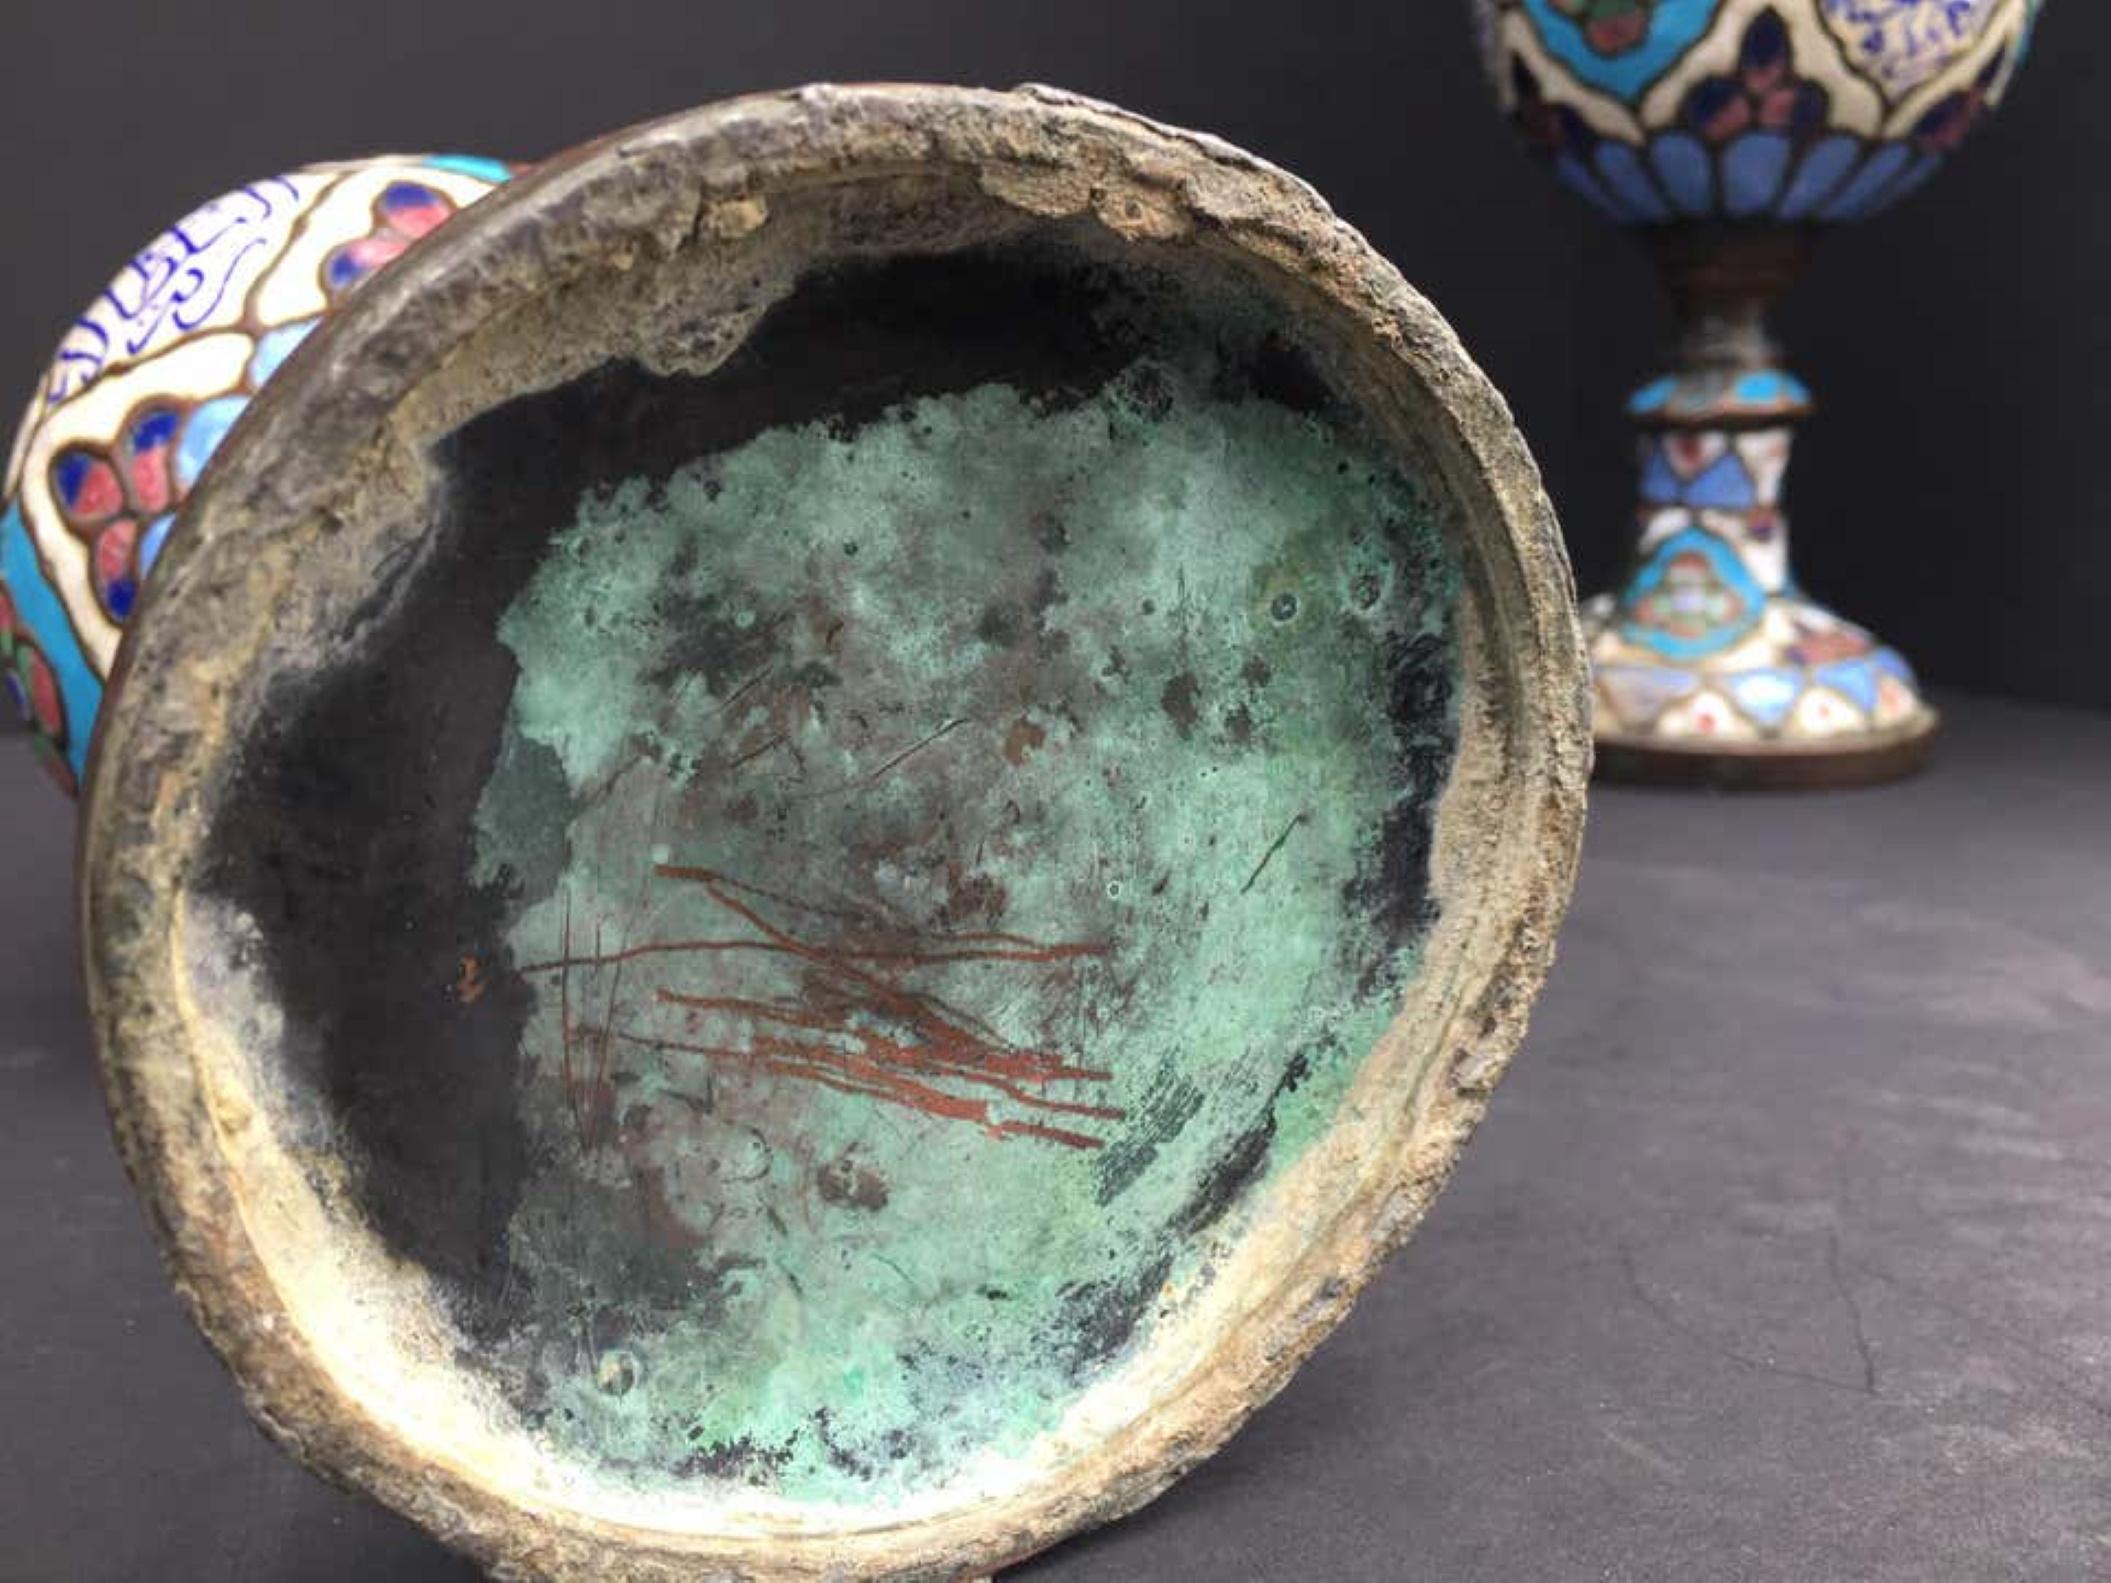 This is an exceptional and historic pair of Damascus enameled metalwork vessels or urns. These art objects show signs of rough use and handling through the centuries. Although it is almost impossible to determine the age of enameled metalwork, these